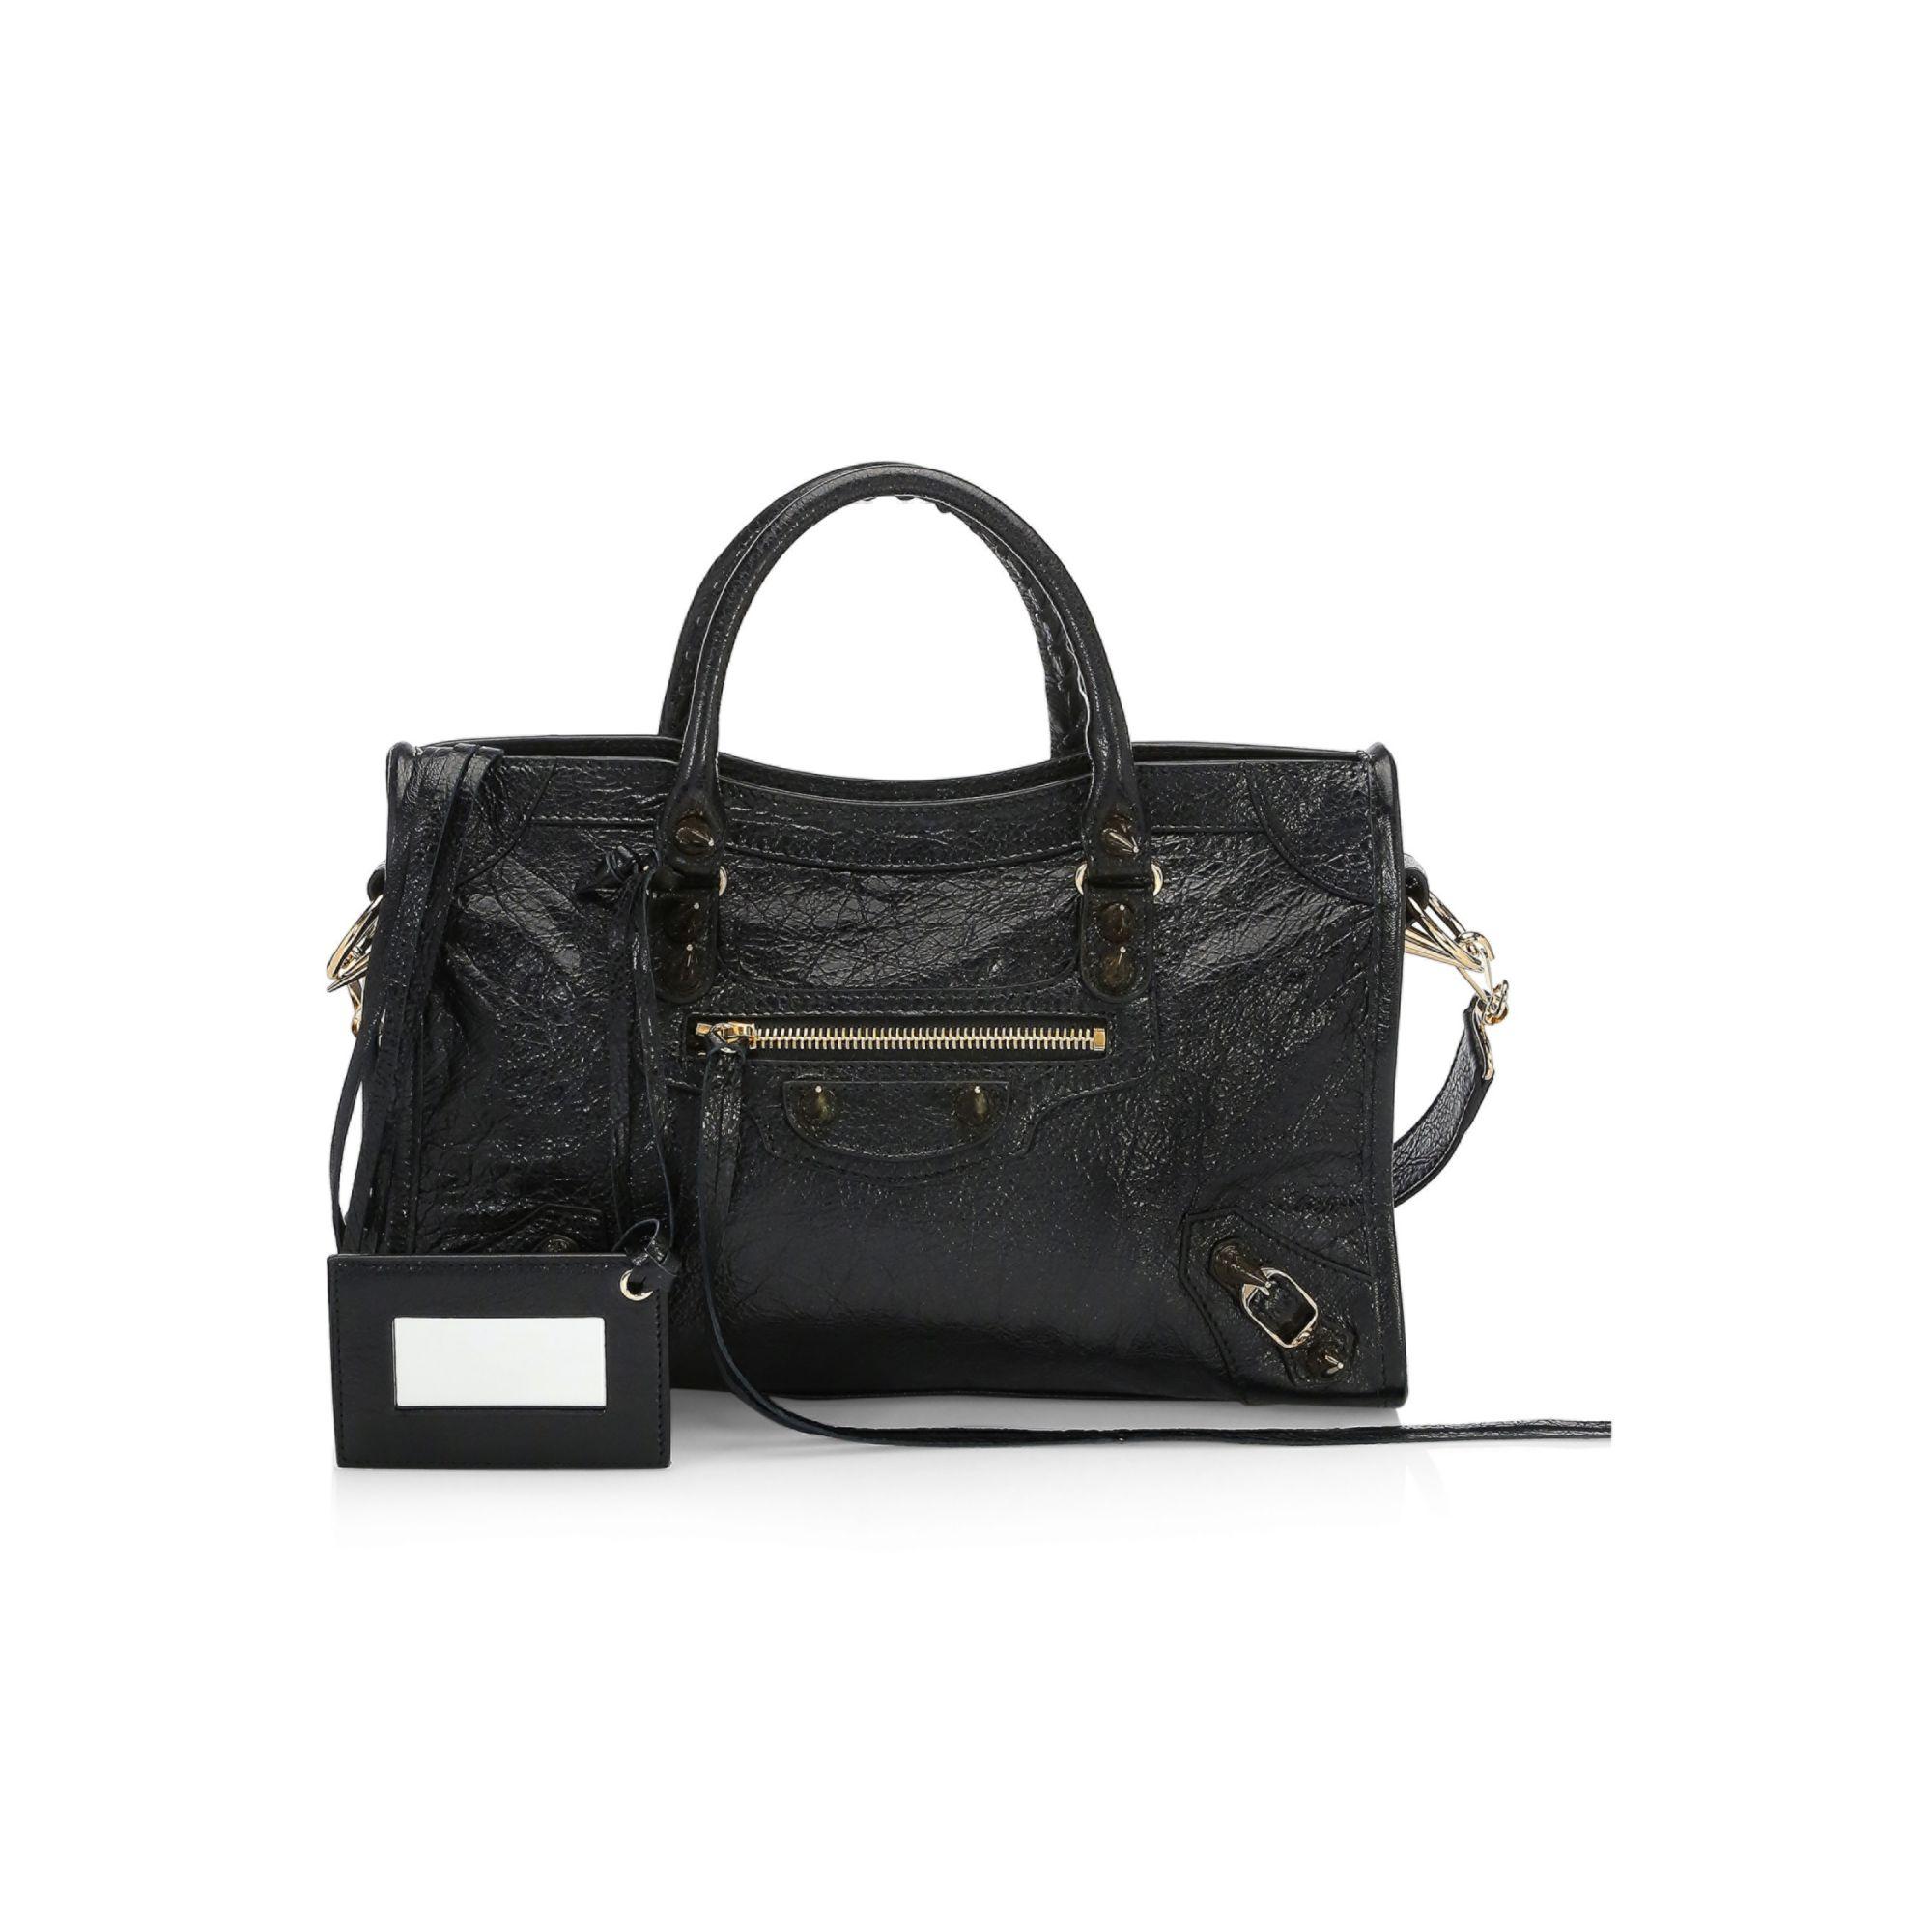 Balenciaga Small Classic City Spike Leather Satchel in Black | Lyst